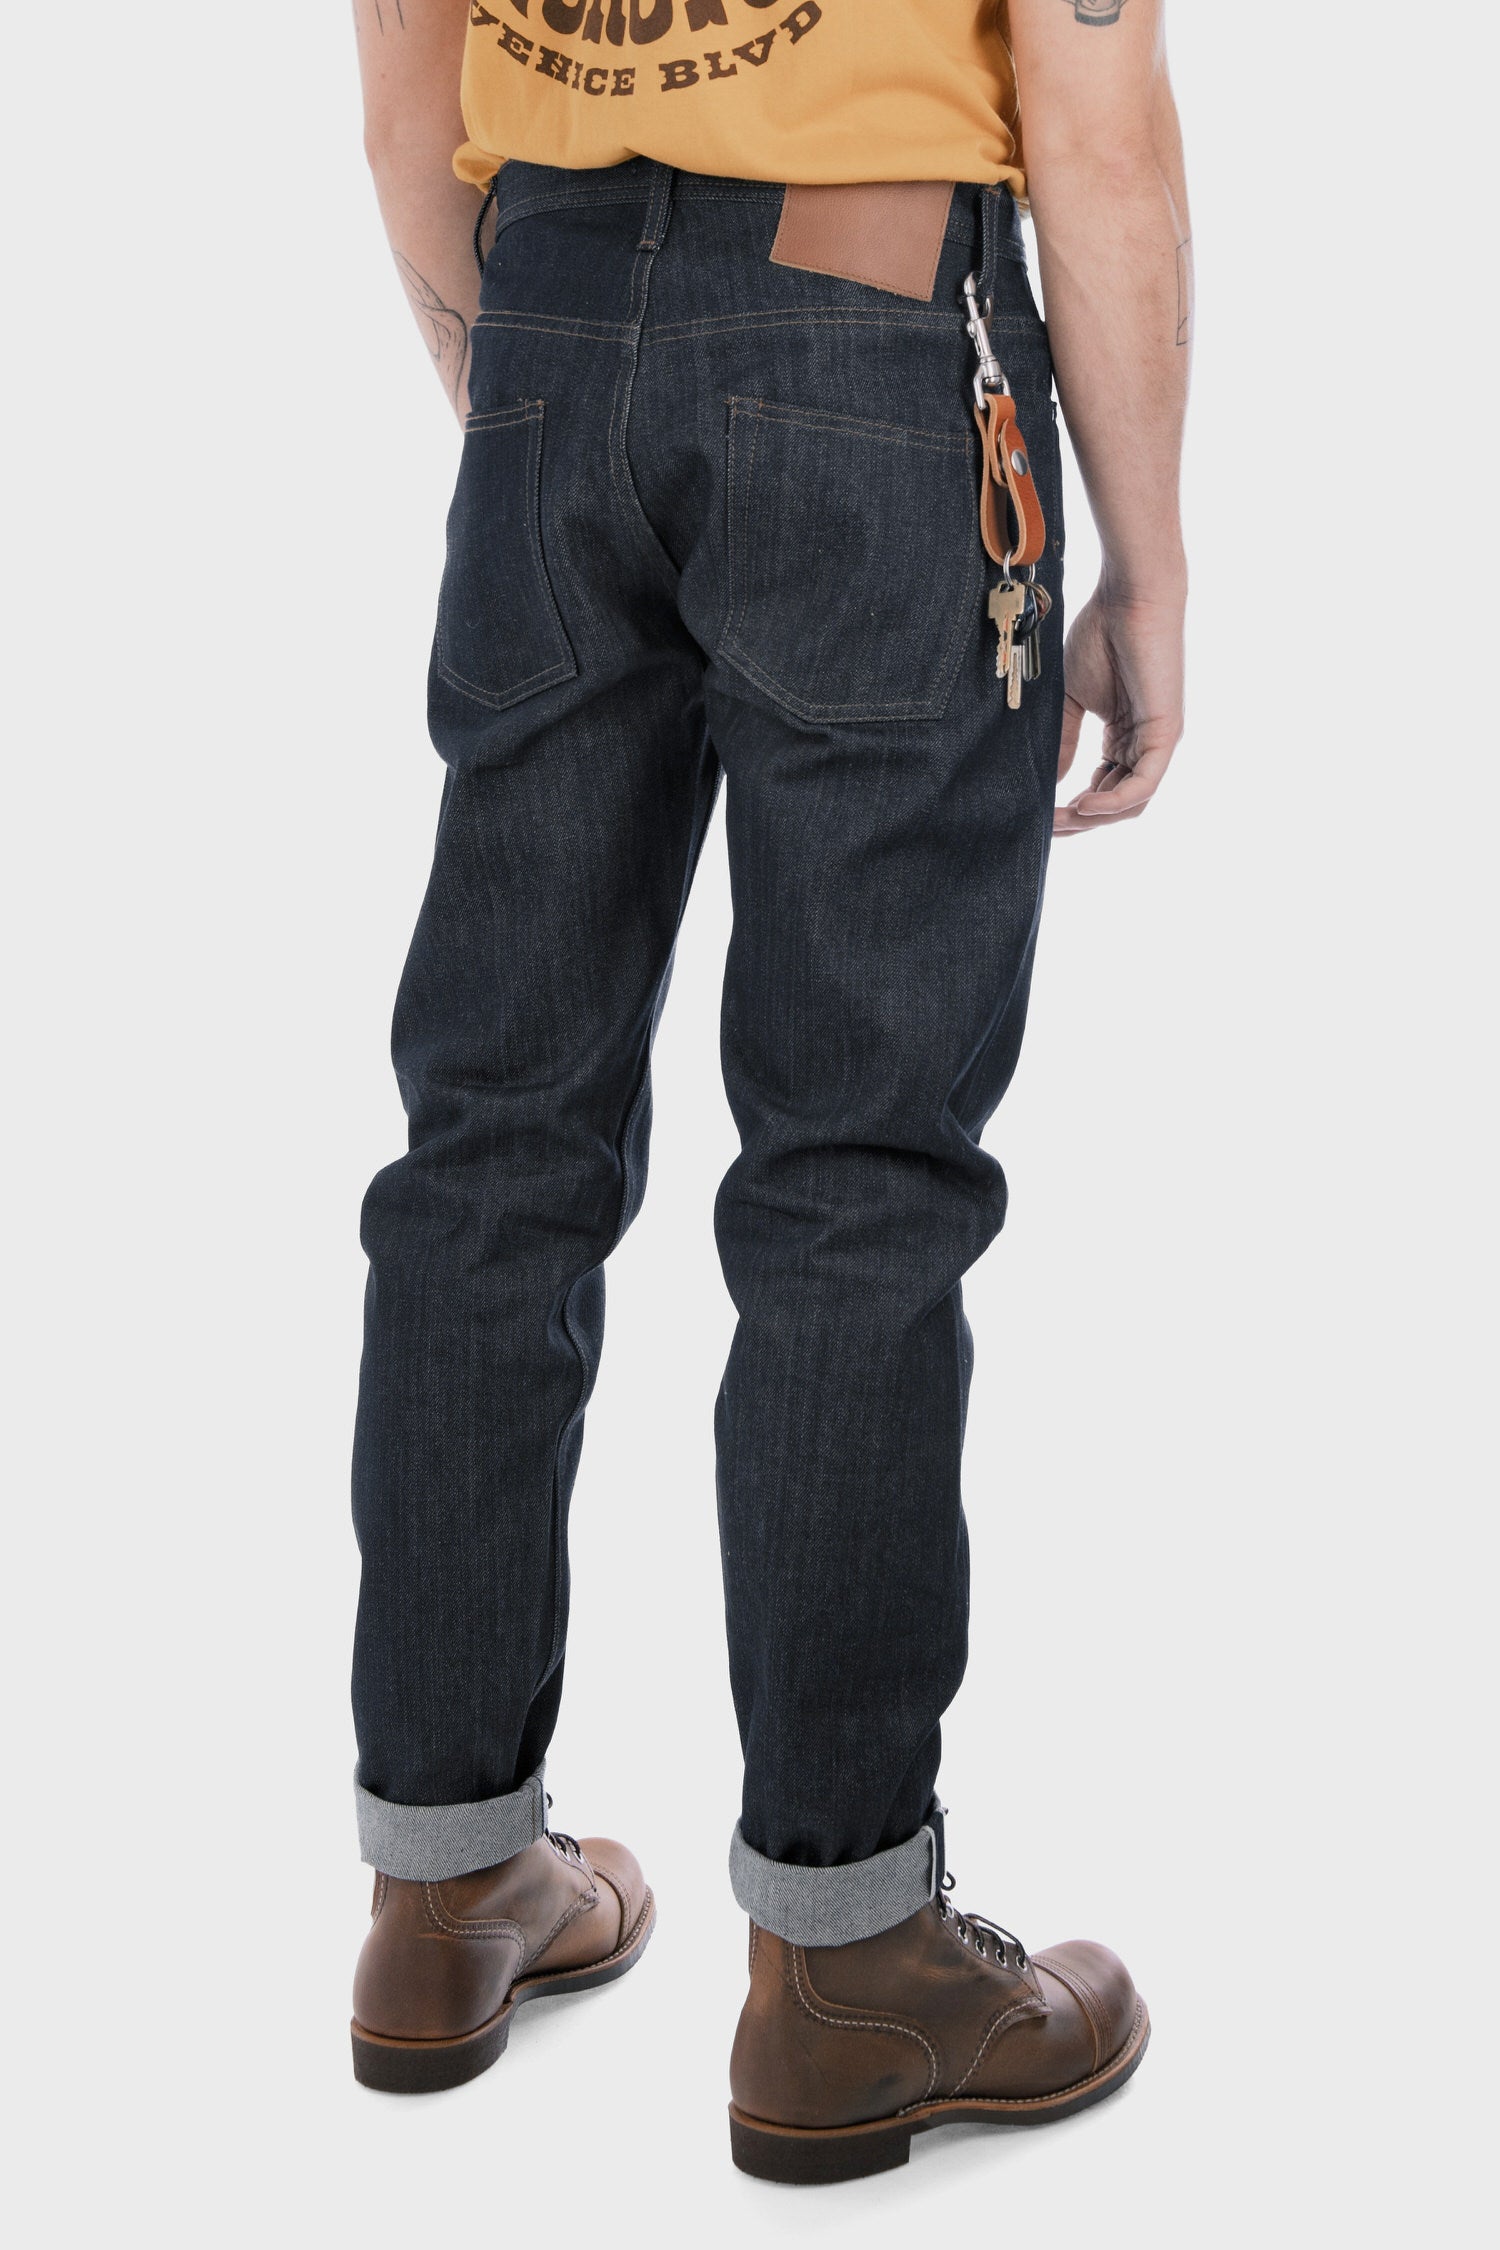 Unbranded Relaxed Tapered Fit in Indigo - Philistine